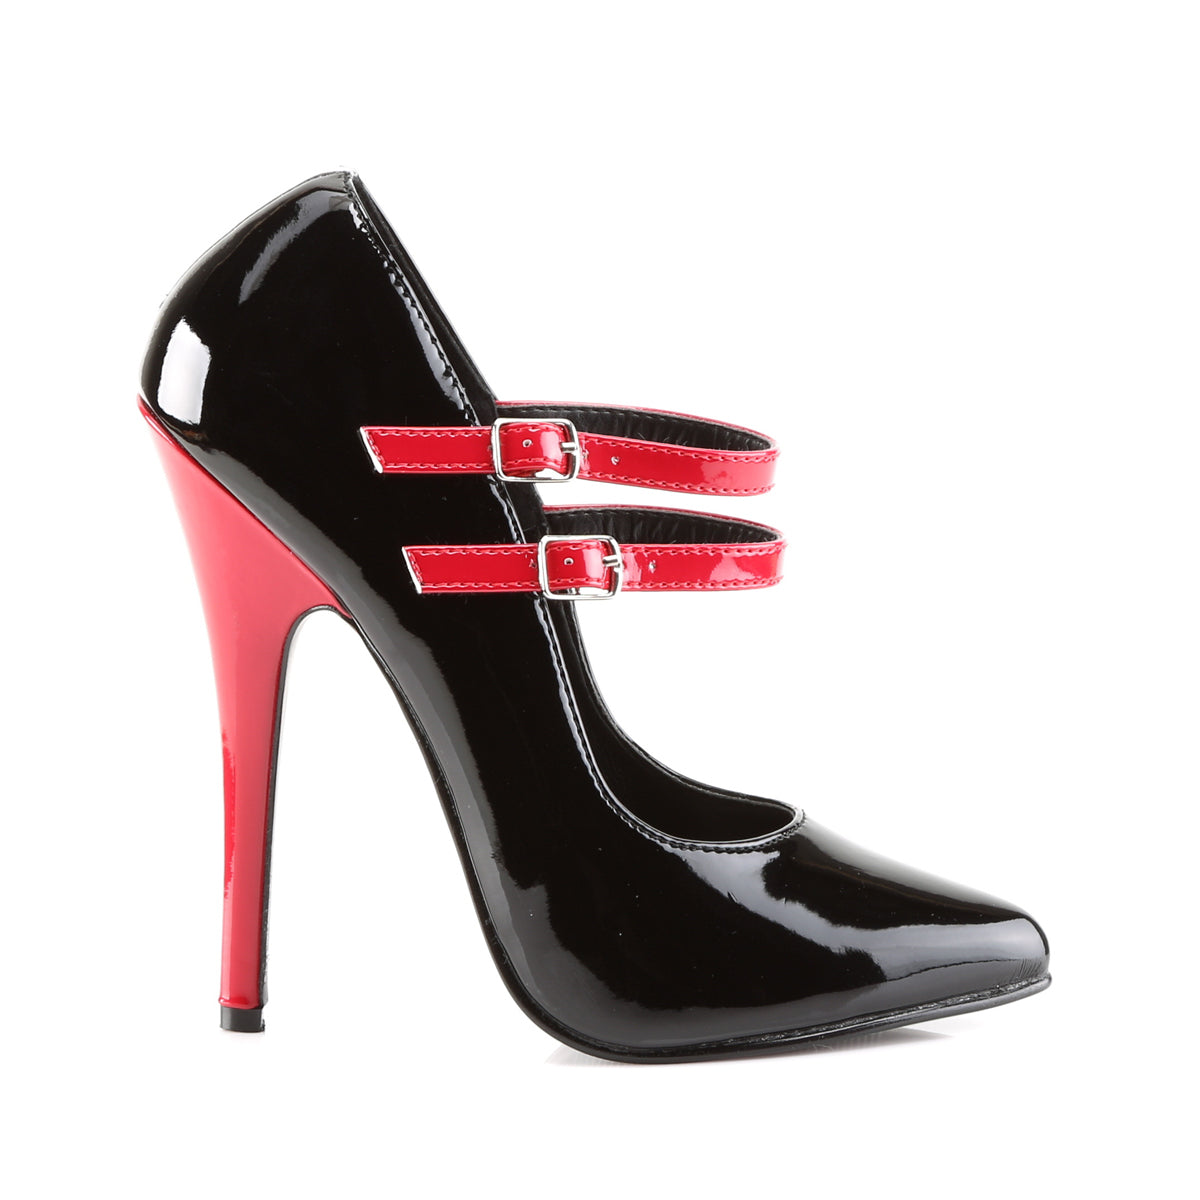 Devious Womens Pumps DOMINA-442 Blk-Red Pat